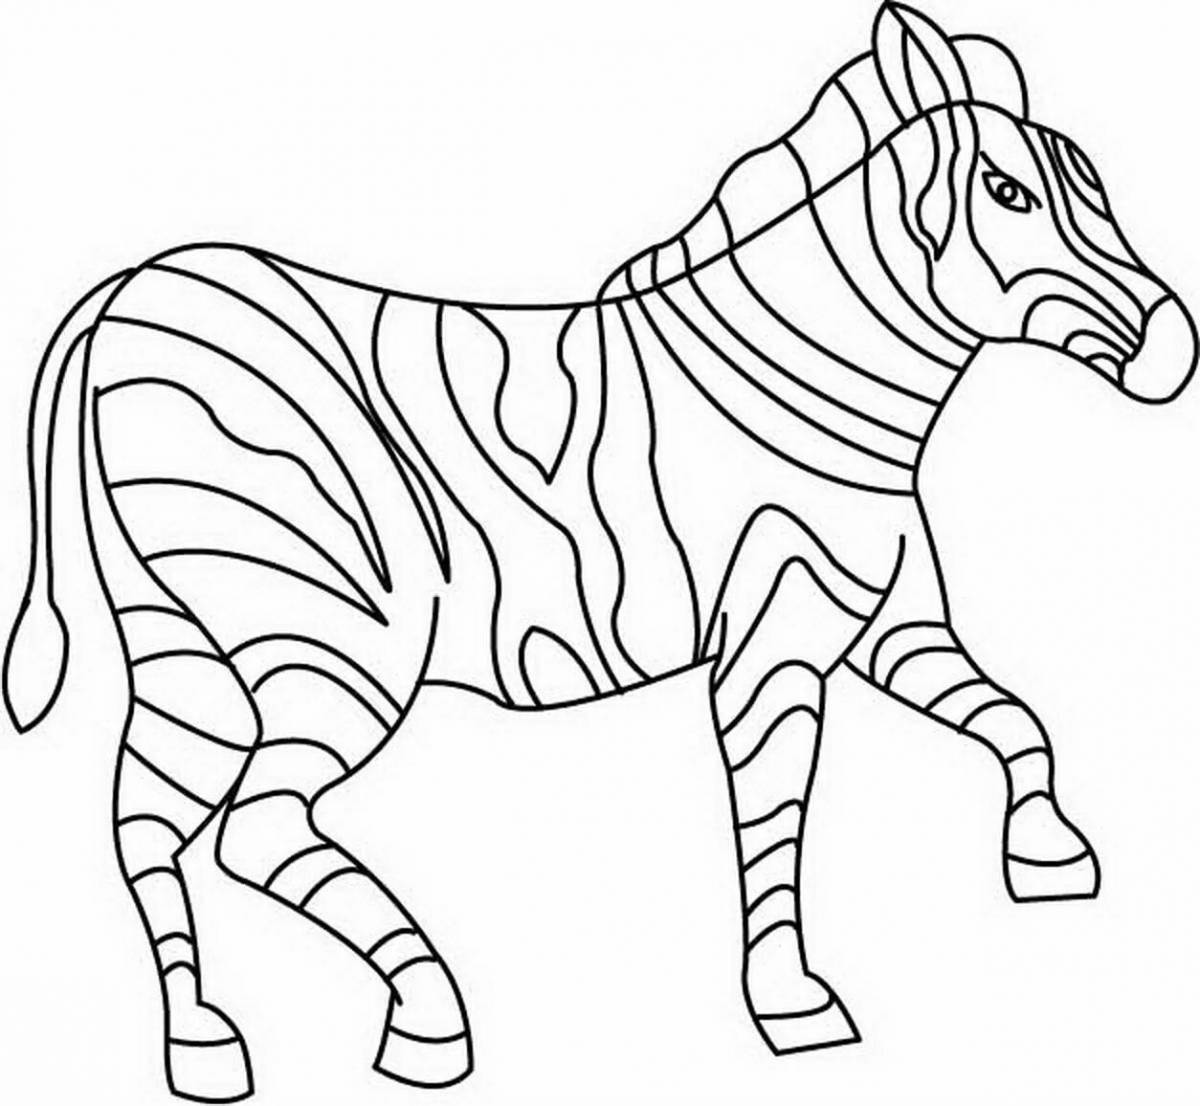 Entertaining coloring animals of hot countries for children 5 years old